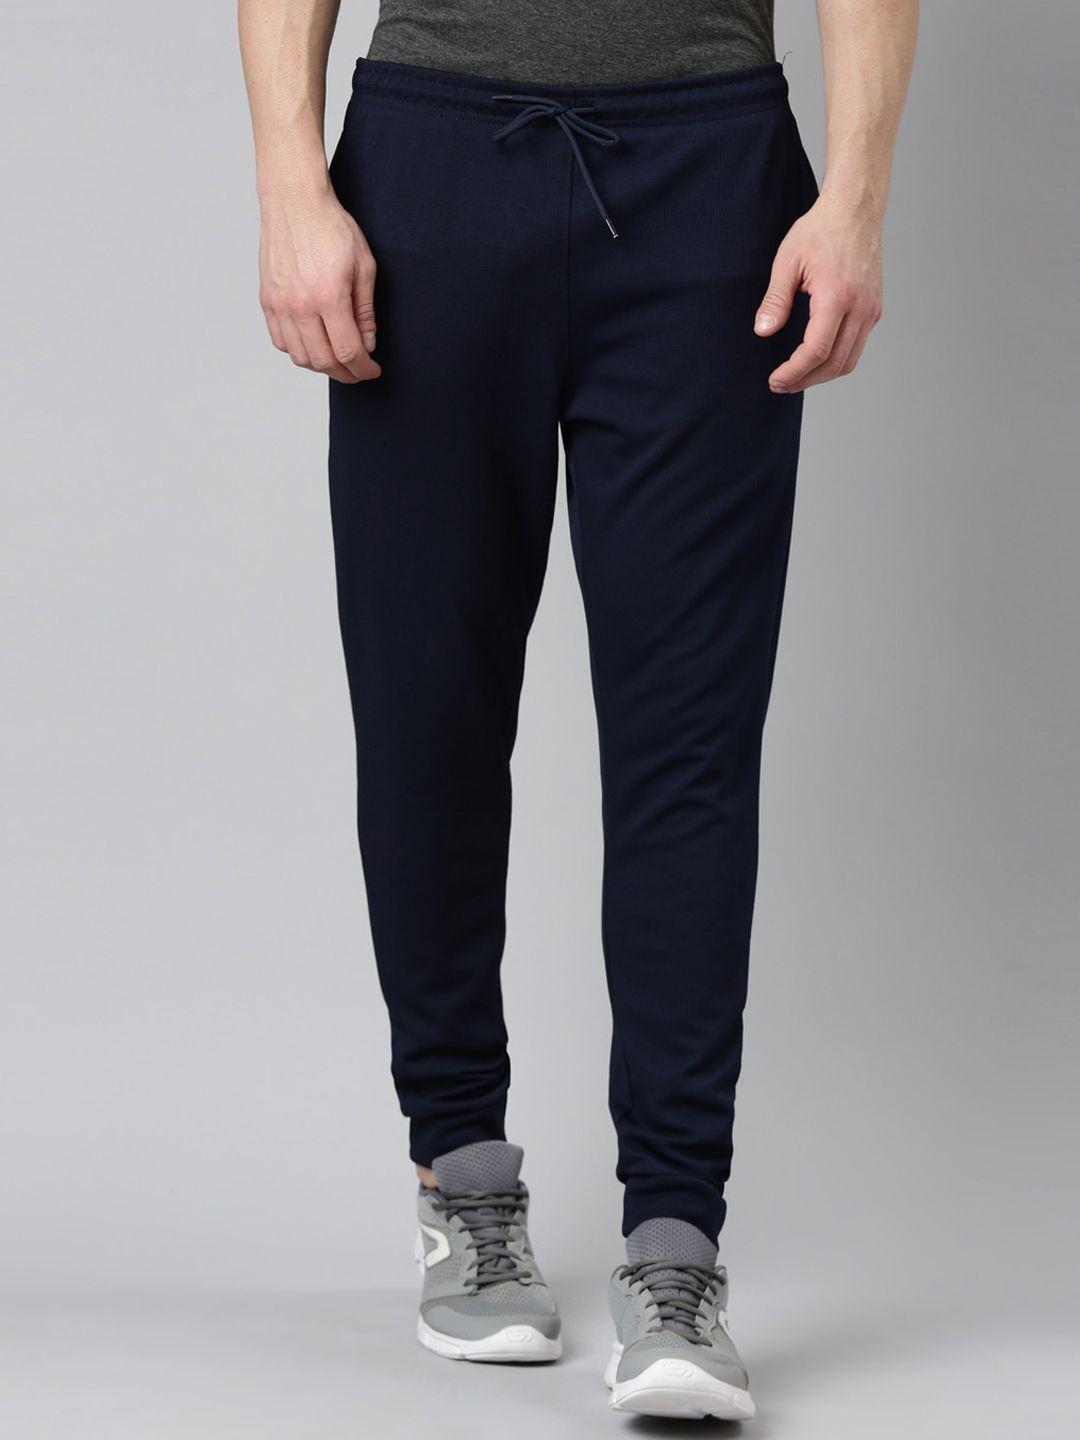 madsto men mid-rise training or gym joggers